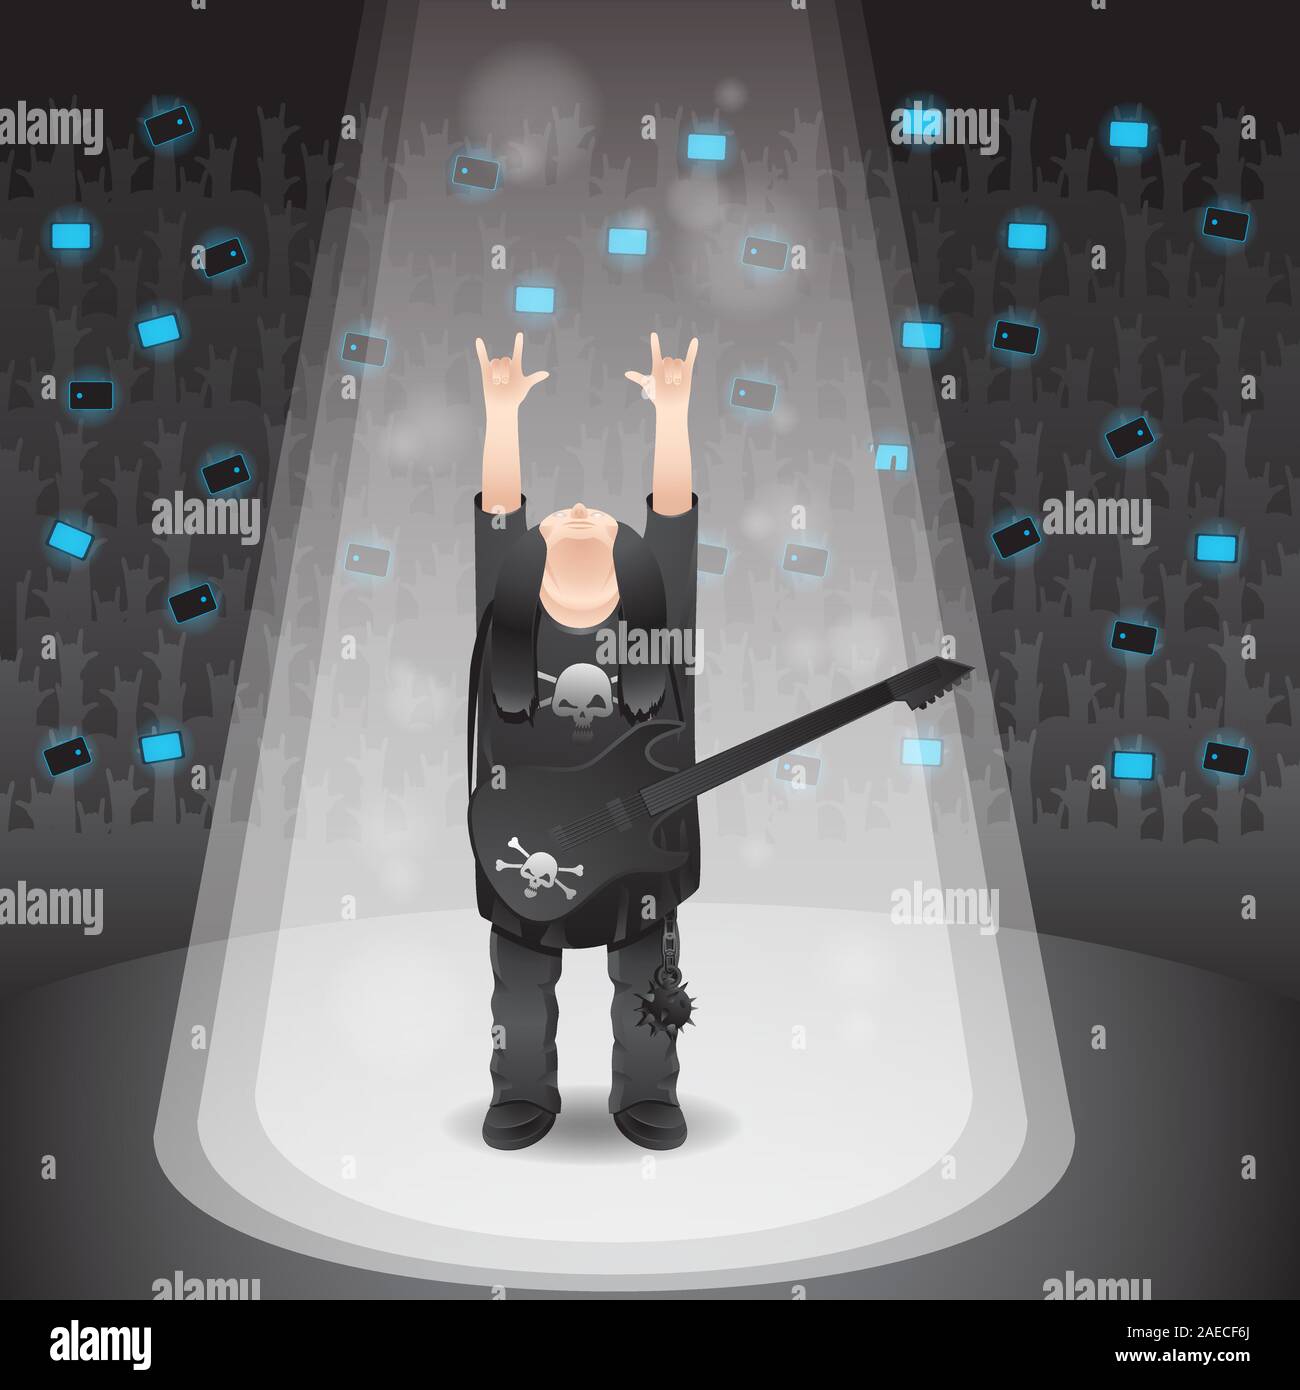 Illustration of a rock singer showing off a horn gesture on an isolated background. Vector image Stock Vector